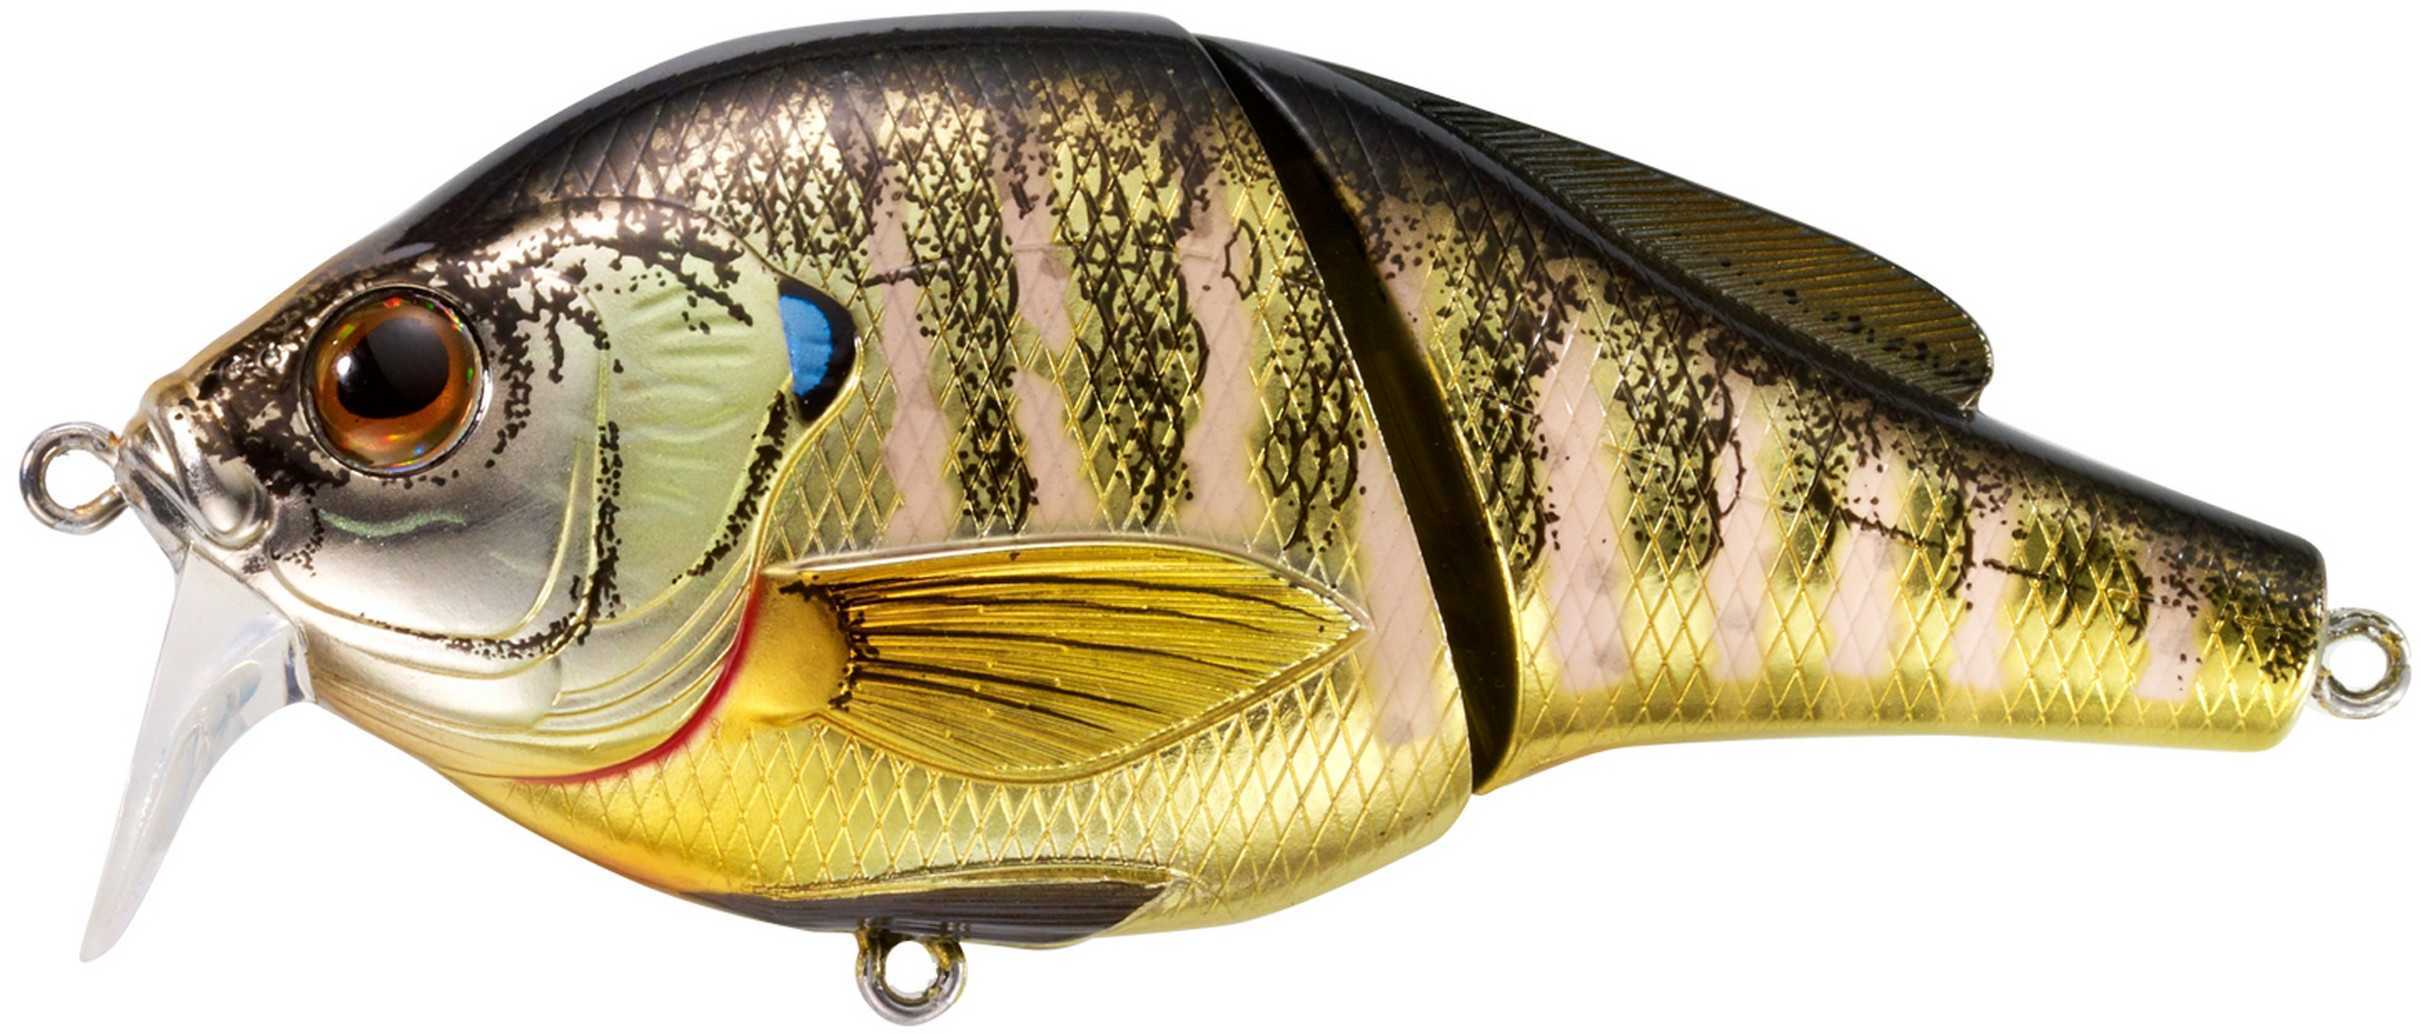 LIVETARGET Lures / Koppers Fishing and Tackle Corp Bluegill Wakebait Metallic/Gloss #4 Md: BGW75T102